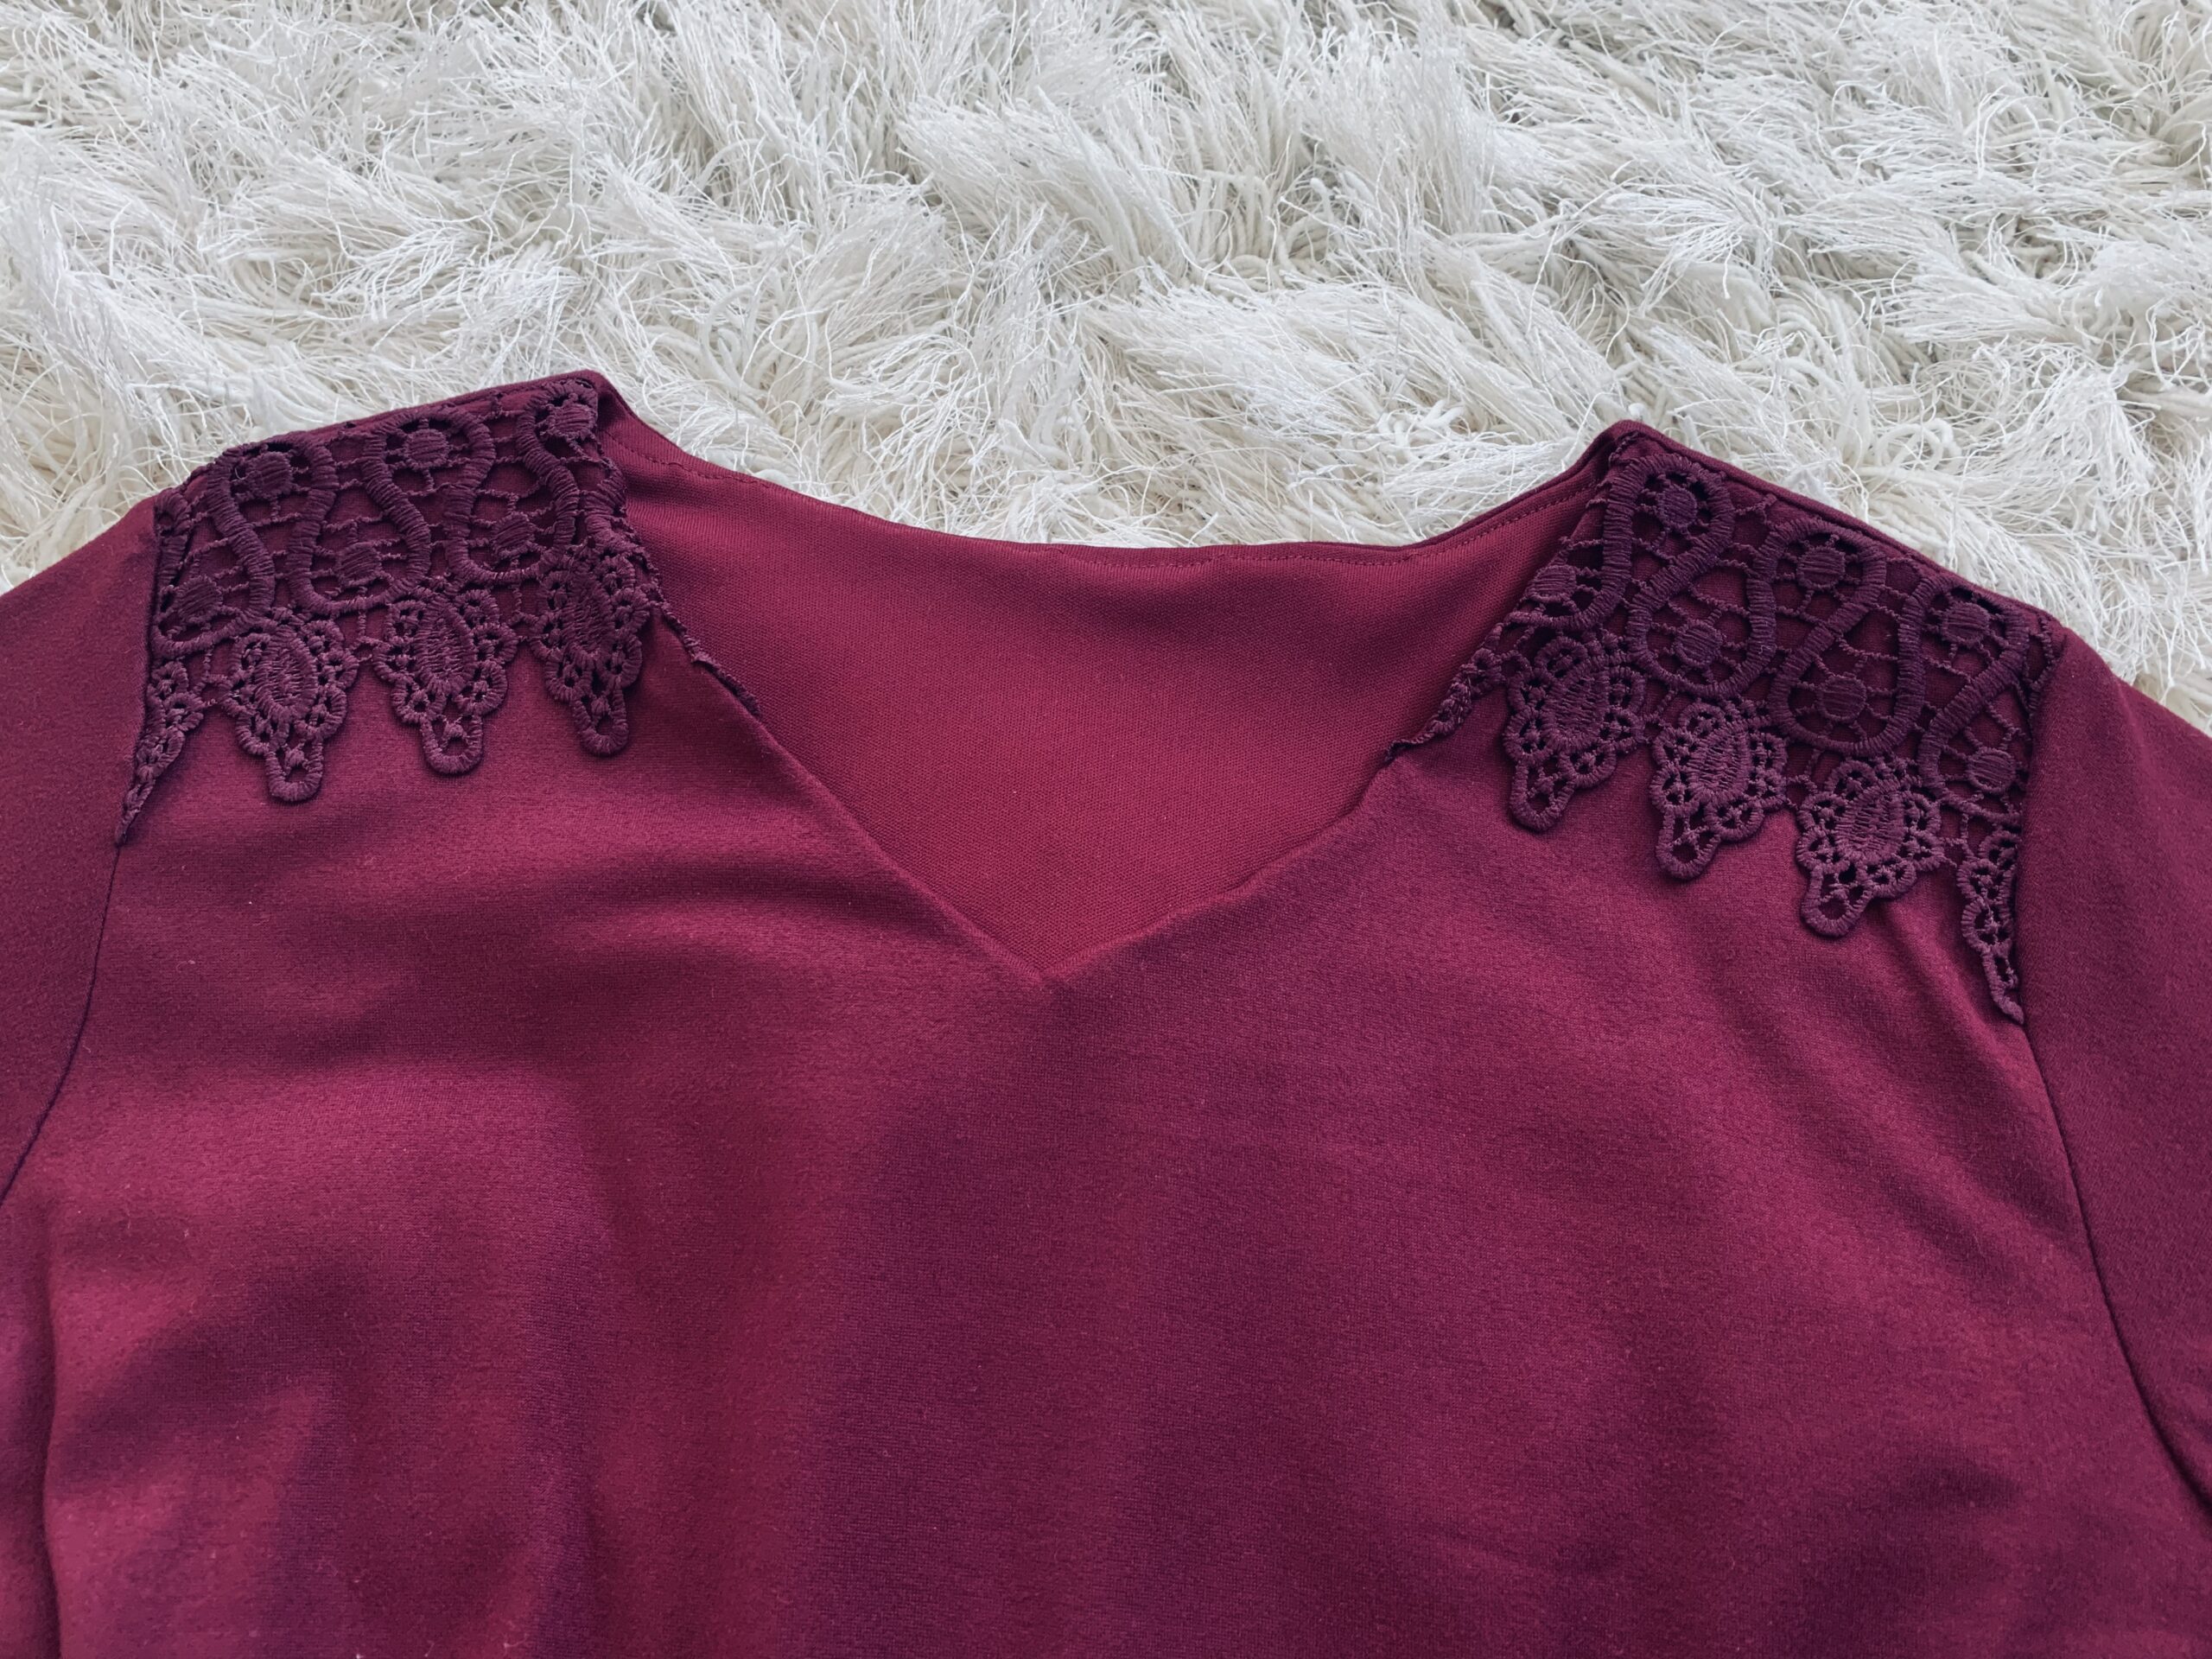 Options-Add Lace To Shoulders - Sew Pretty Fabric